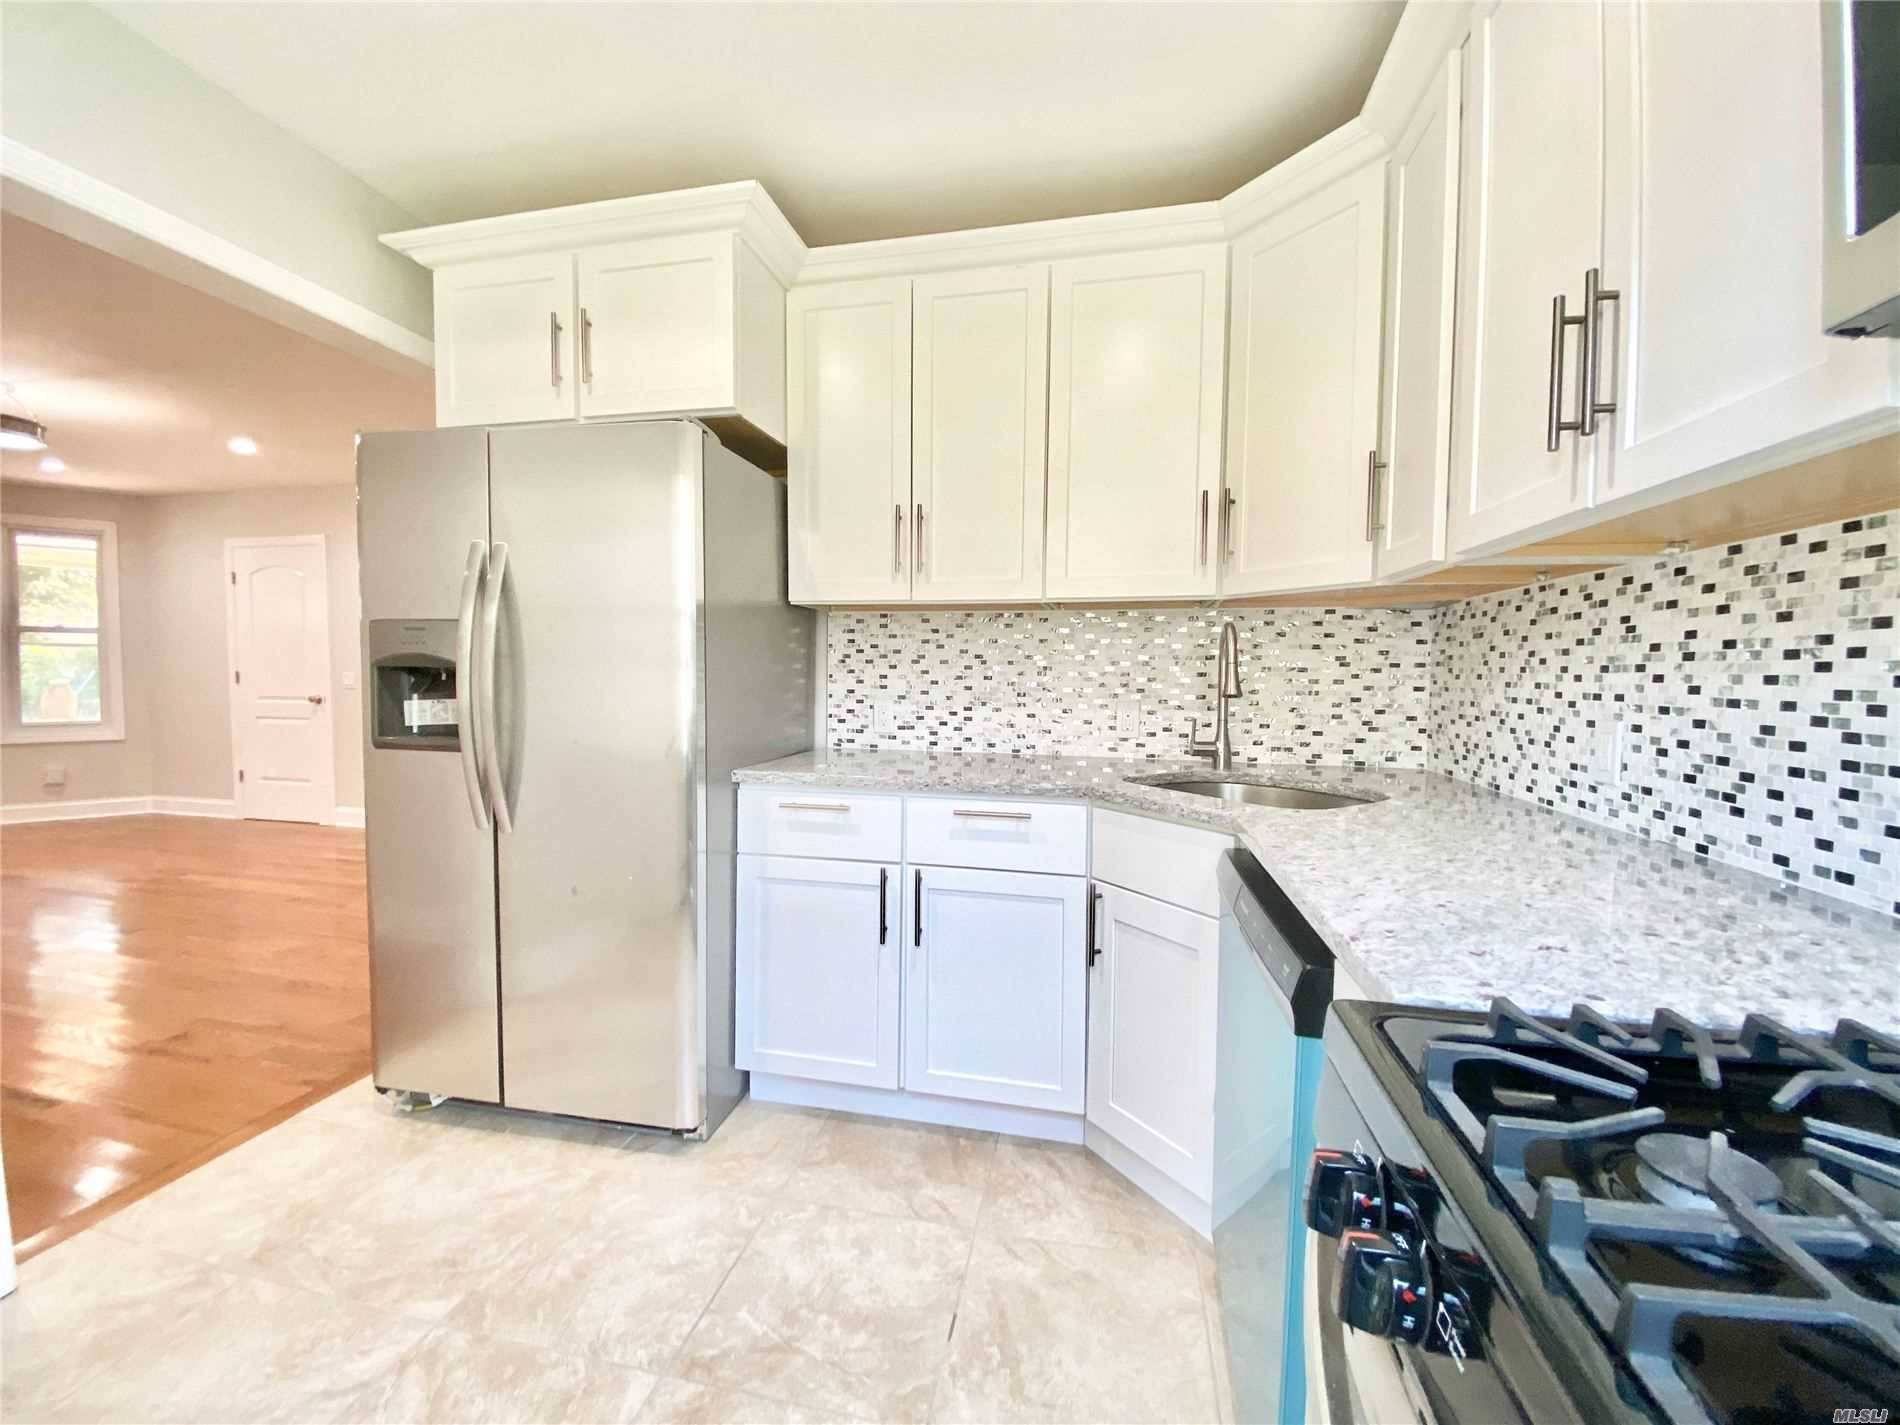 Fully Renovated, new kitchen with new cabinet, new granite countertops all new appliances, new bathrooms,, new floors, doors, roof, new hot water heater, new boiler.